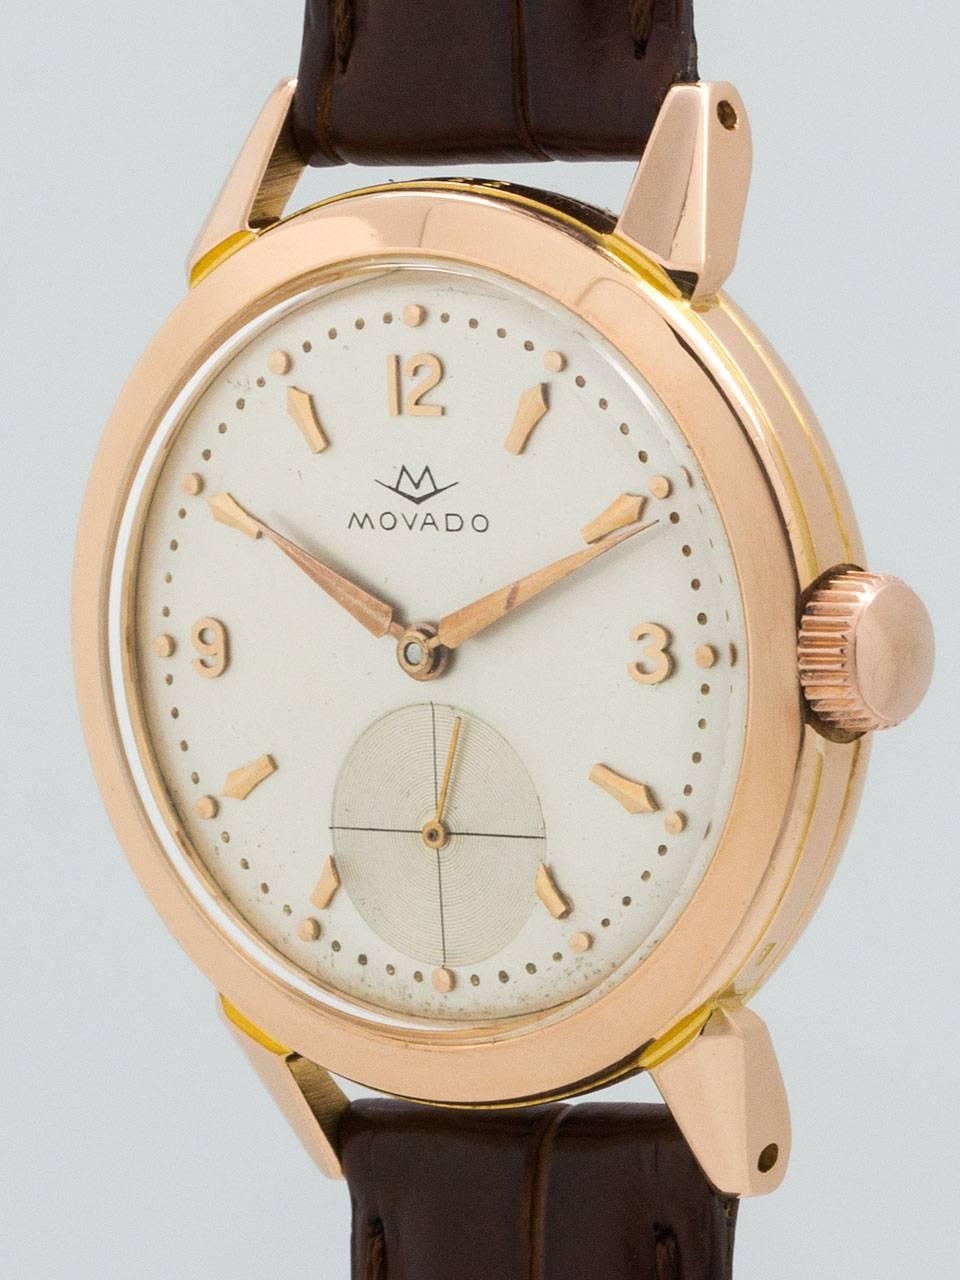 Movado Rose Gold Dress Wristwatch  In Excellent Condition For Sale In West Hollywood, CA